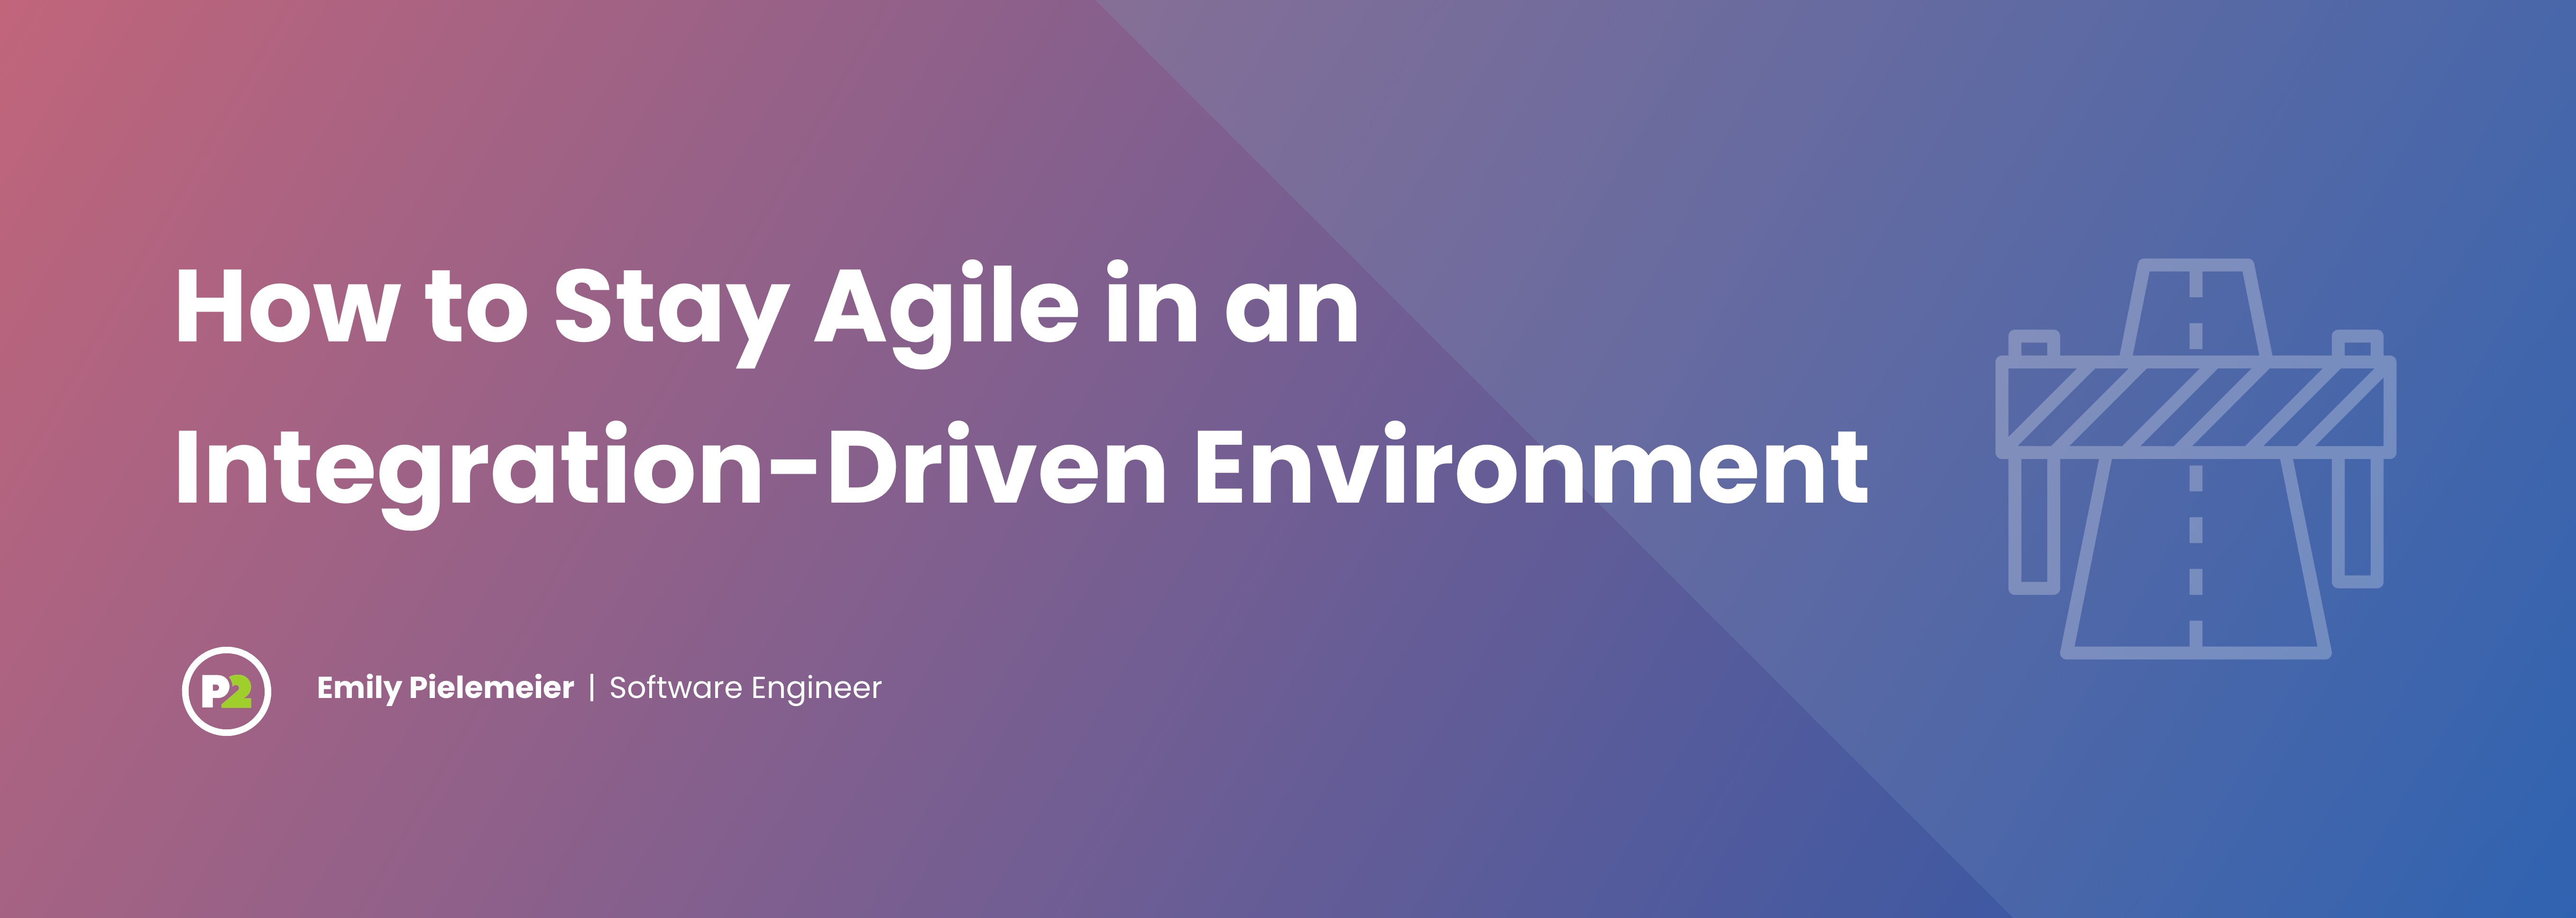 How to stay agile in an integration-driven environment